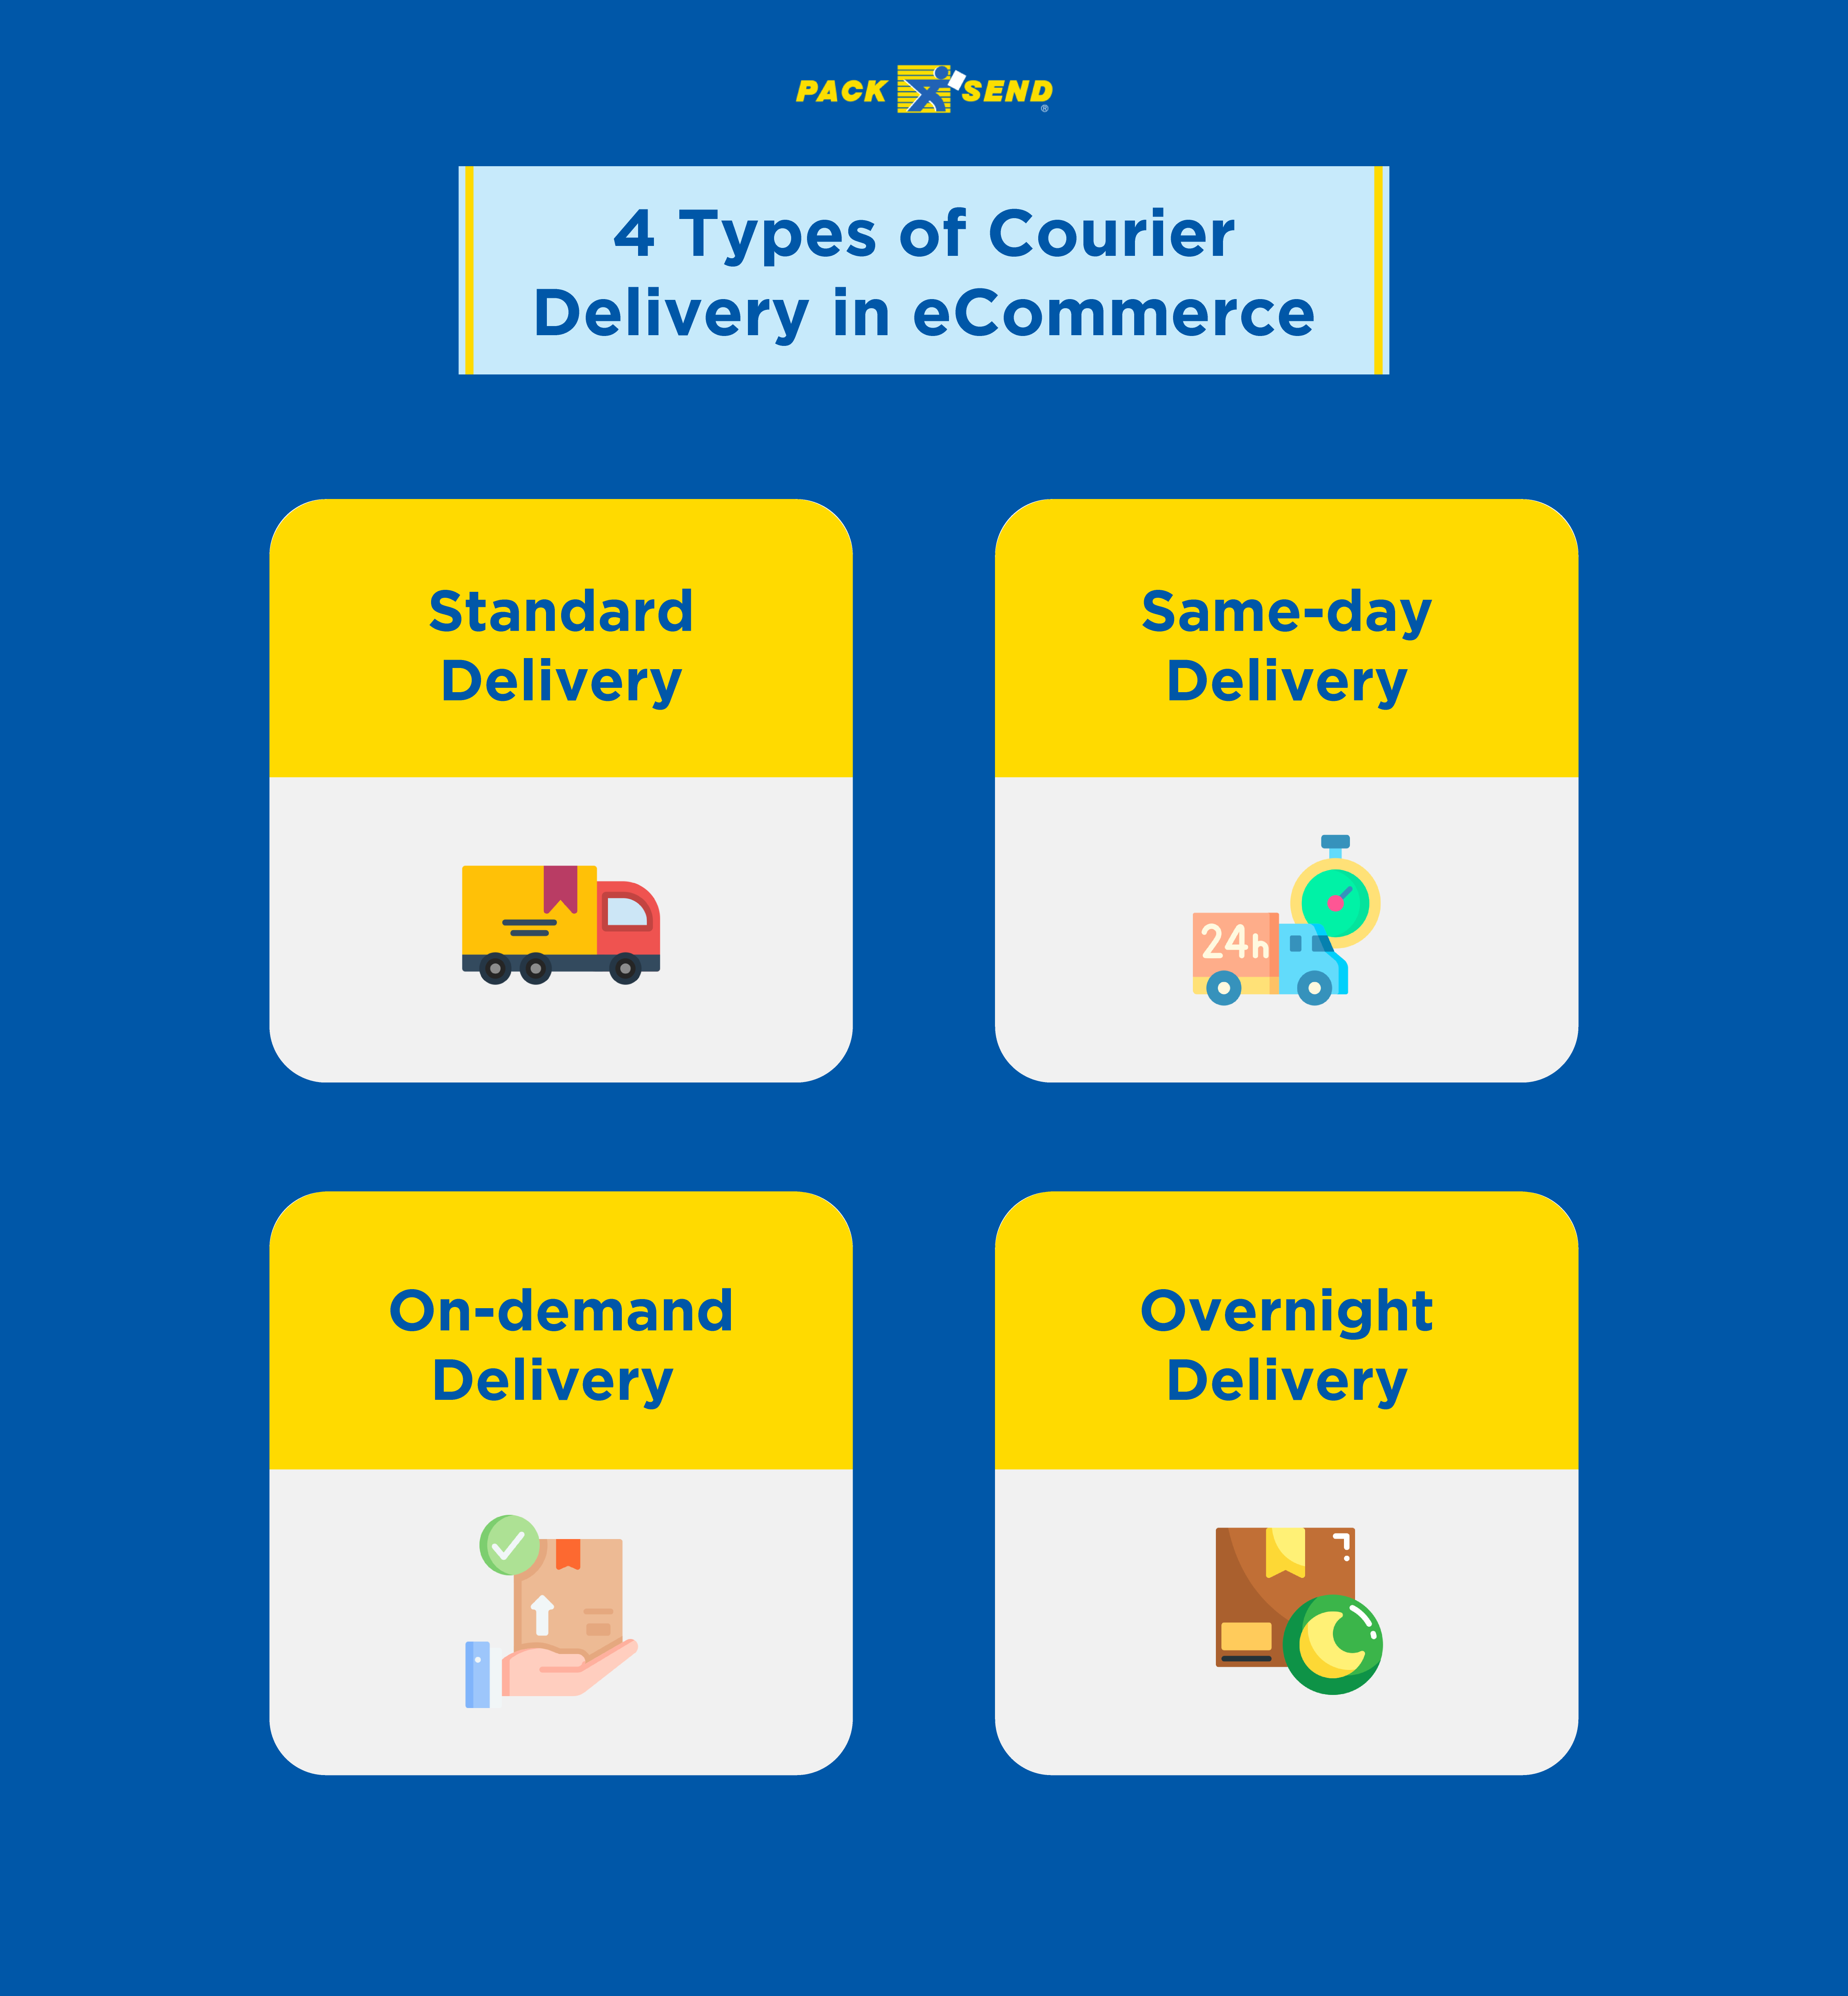 4 Types of Courier Delivery in eCommerce